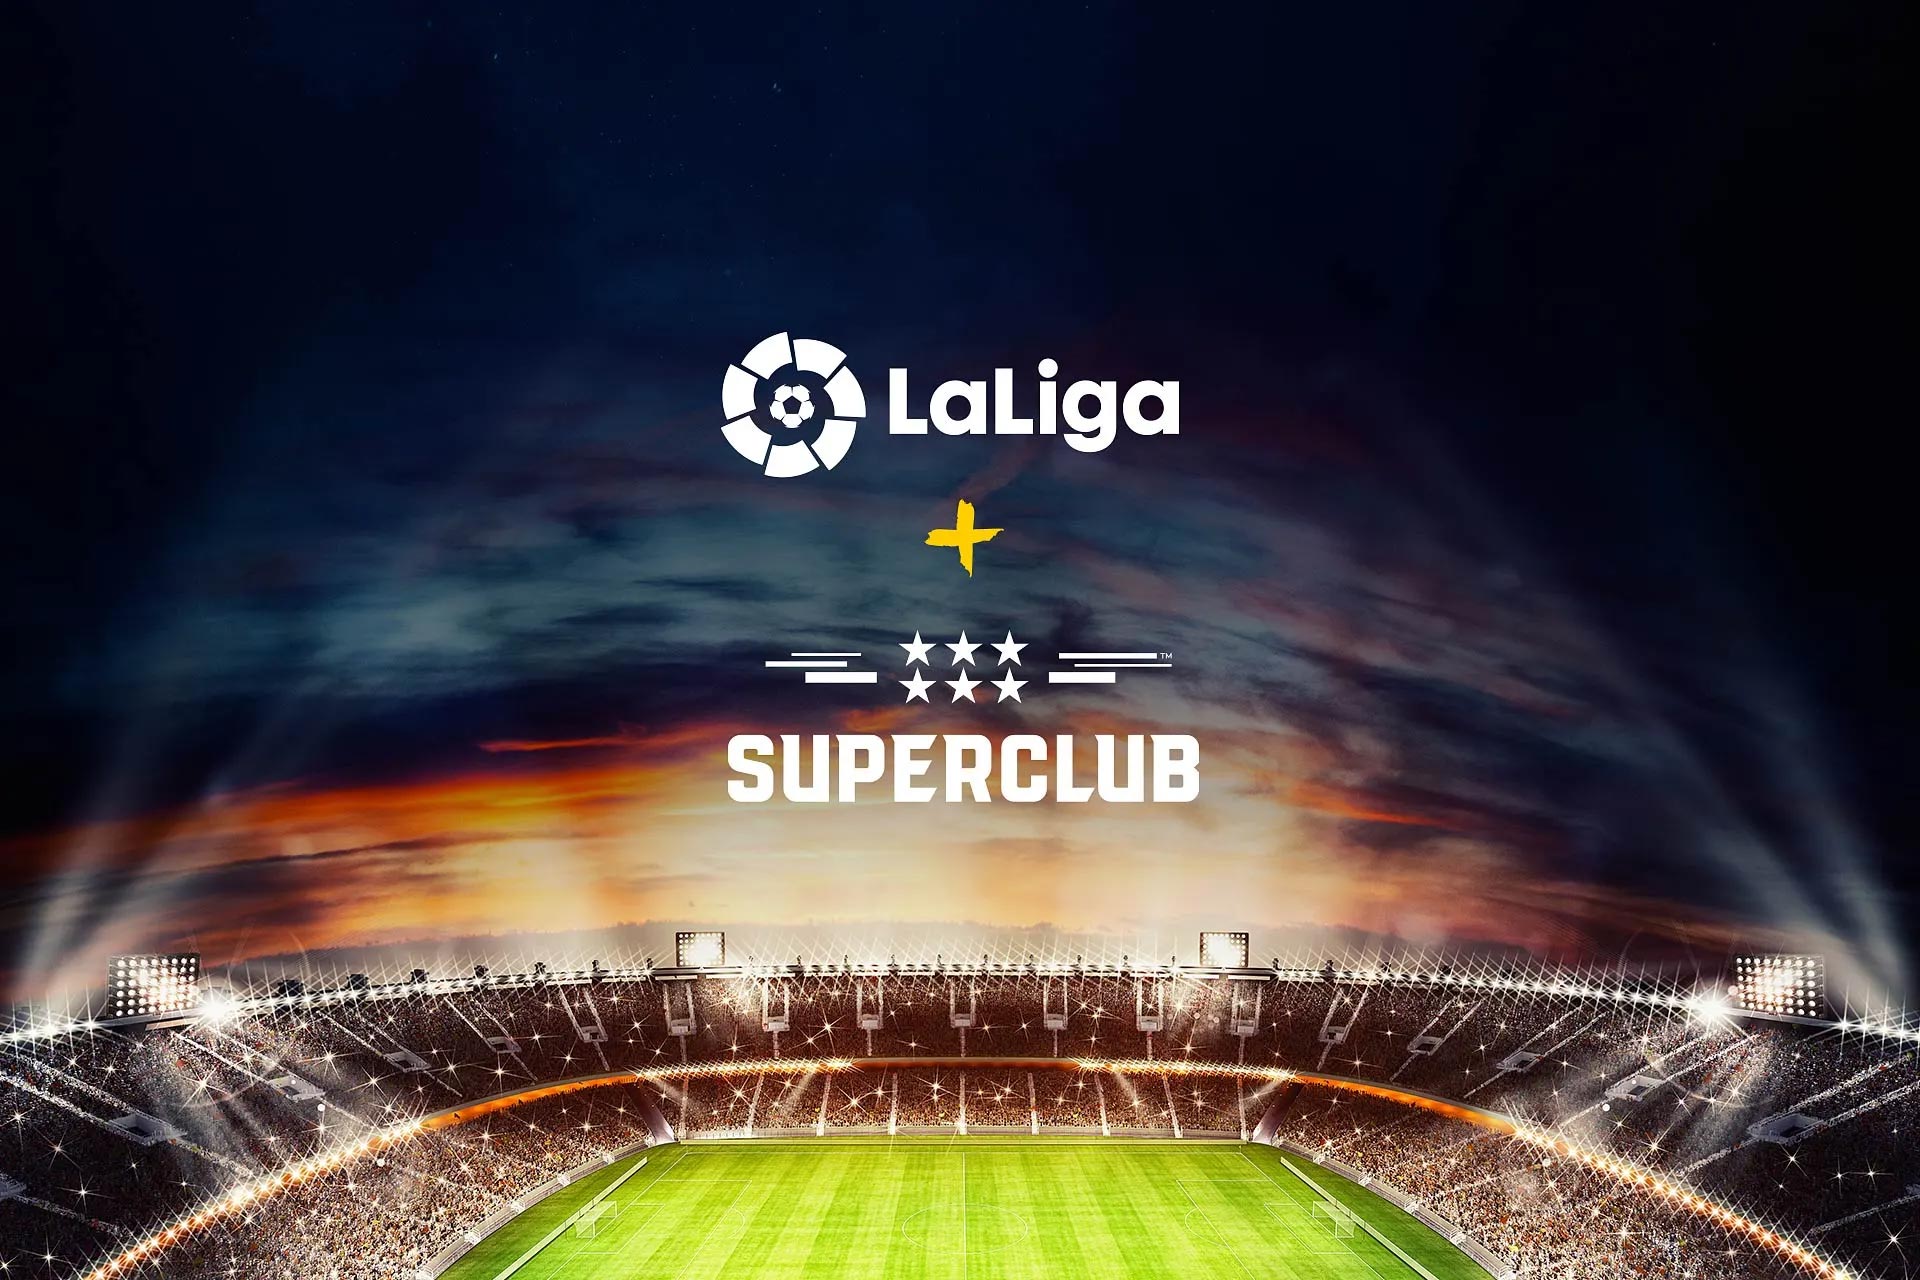 LaLiga partners with Superclub in first global board game licensing agreement